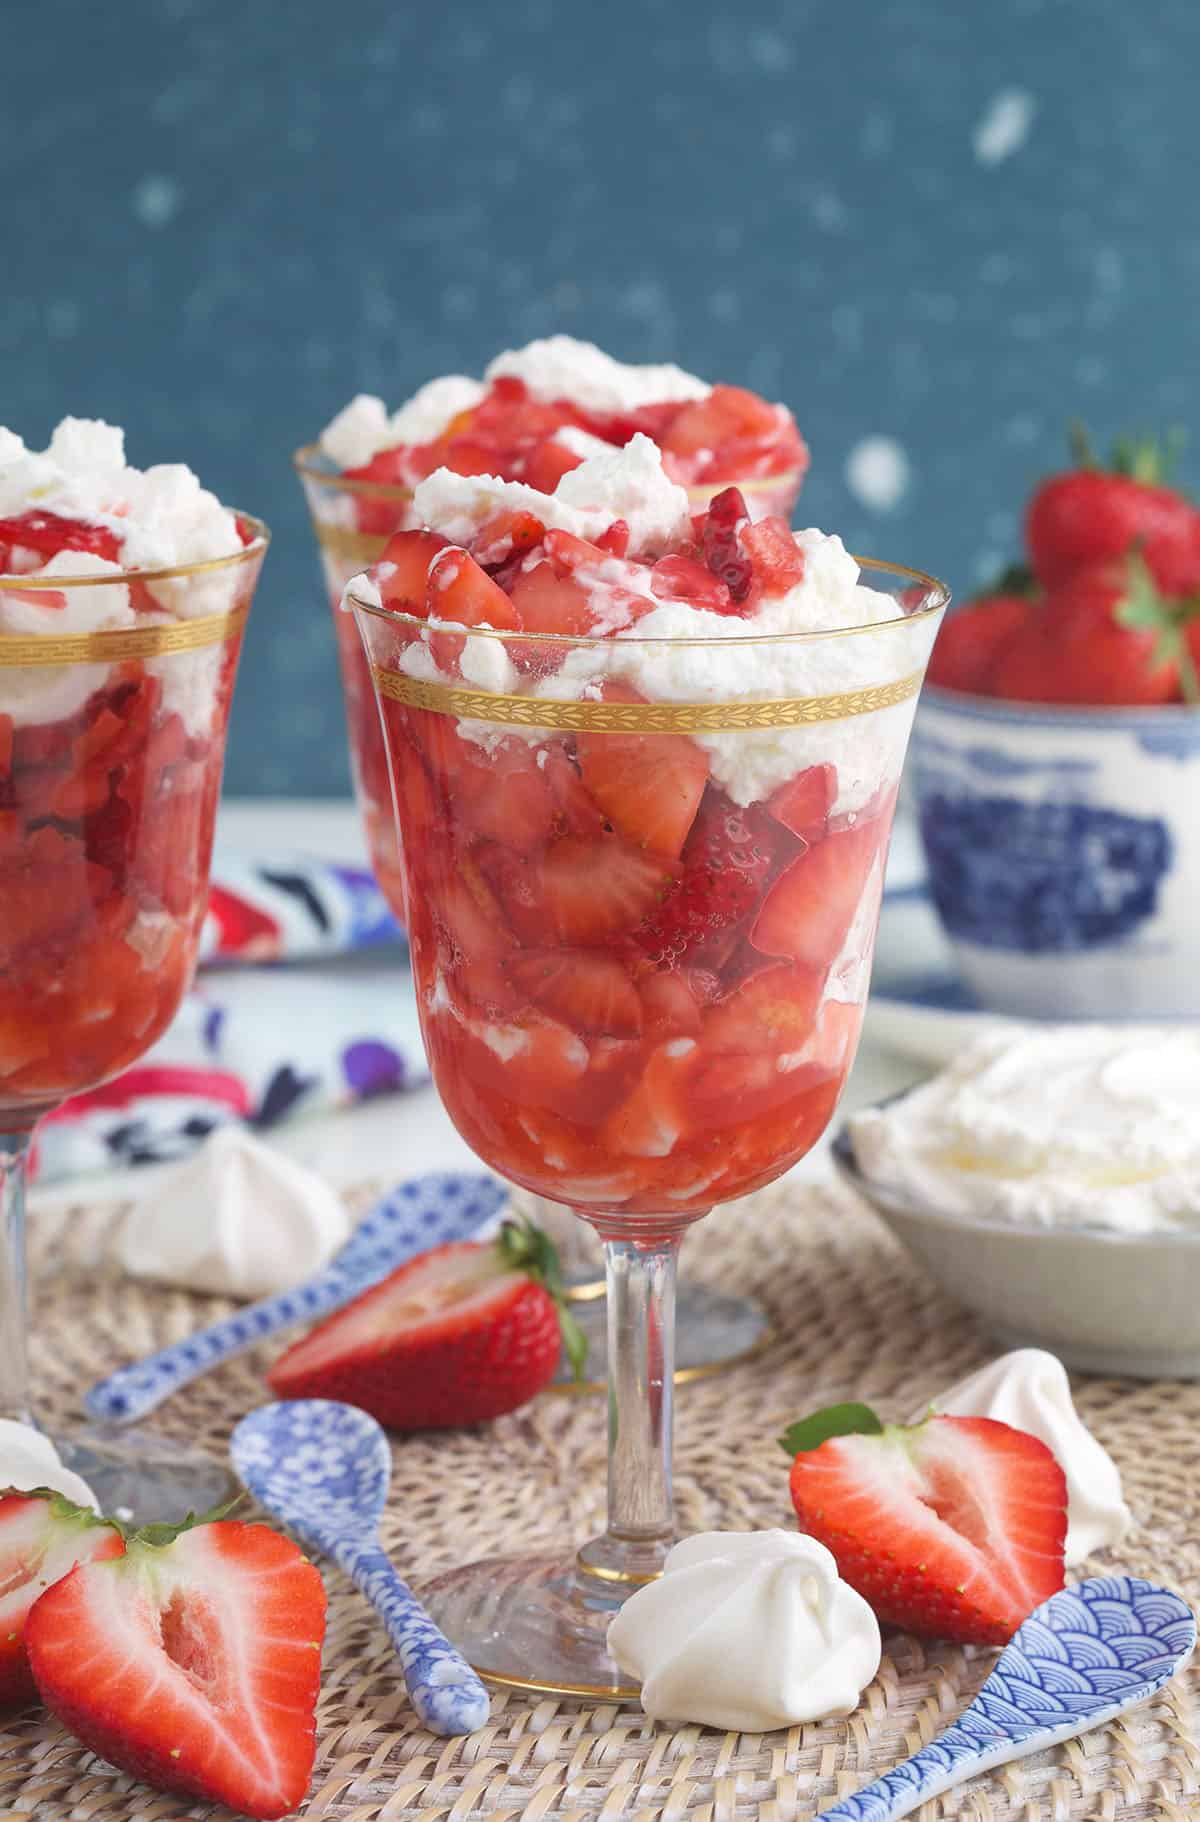 Strawberries and meringue cookies are placed around a single serving of eton mess.